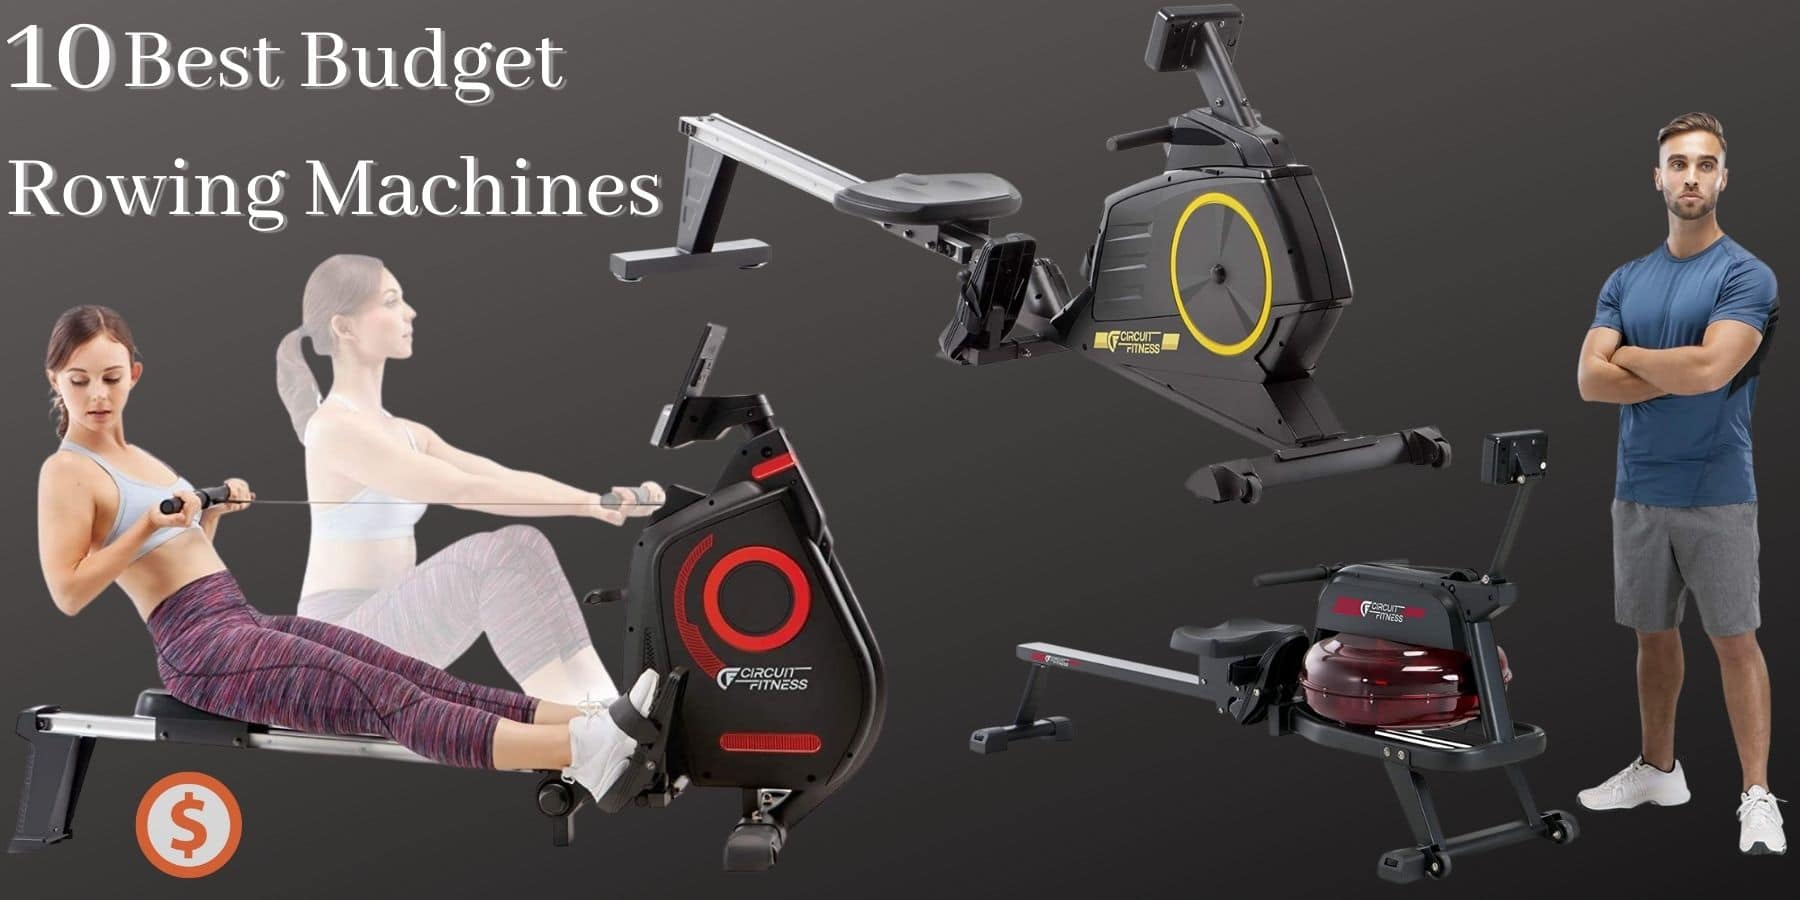 Budget Rowing Machines